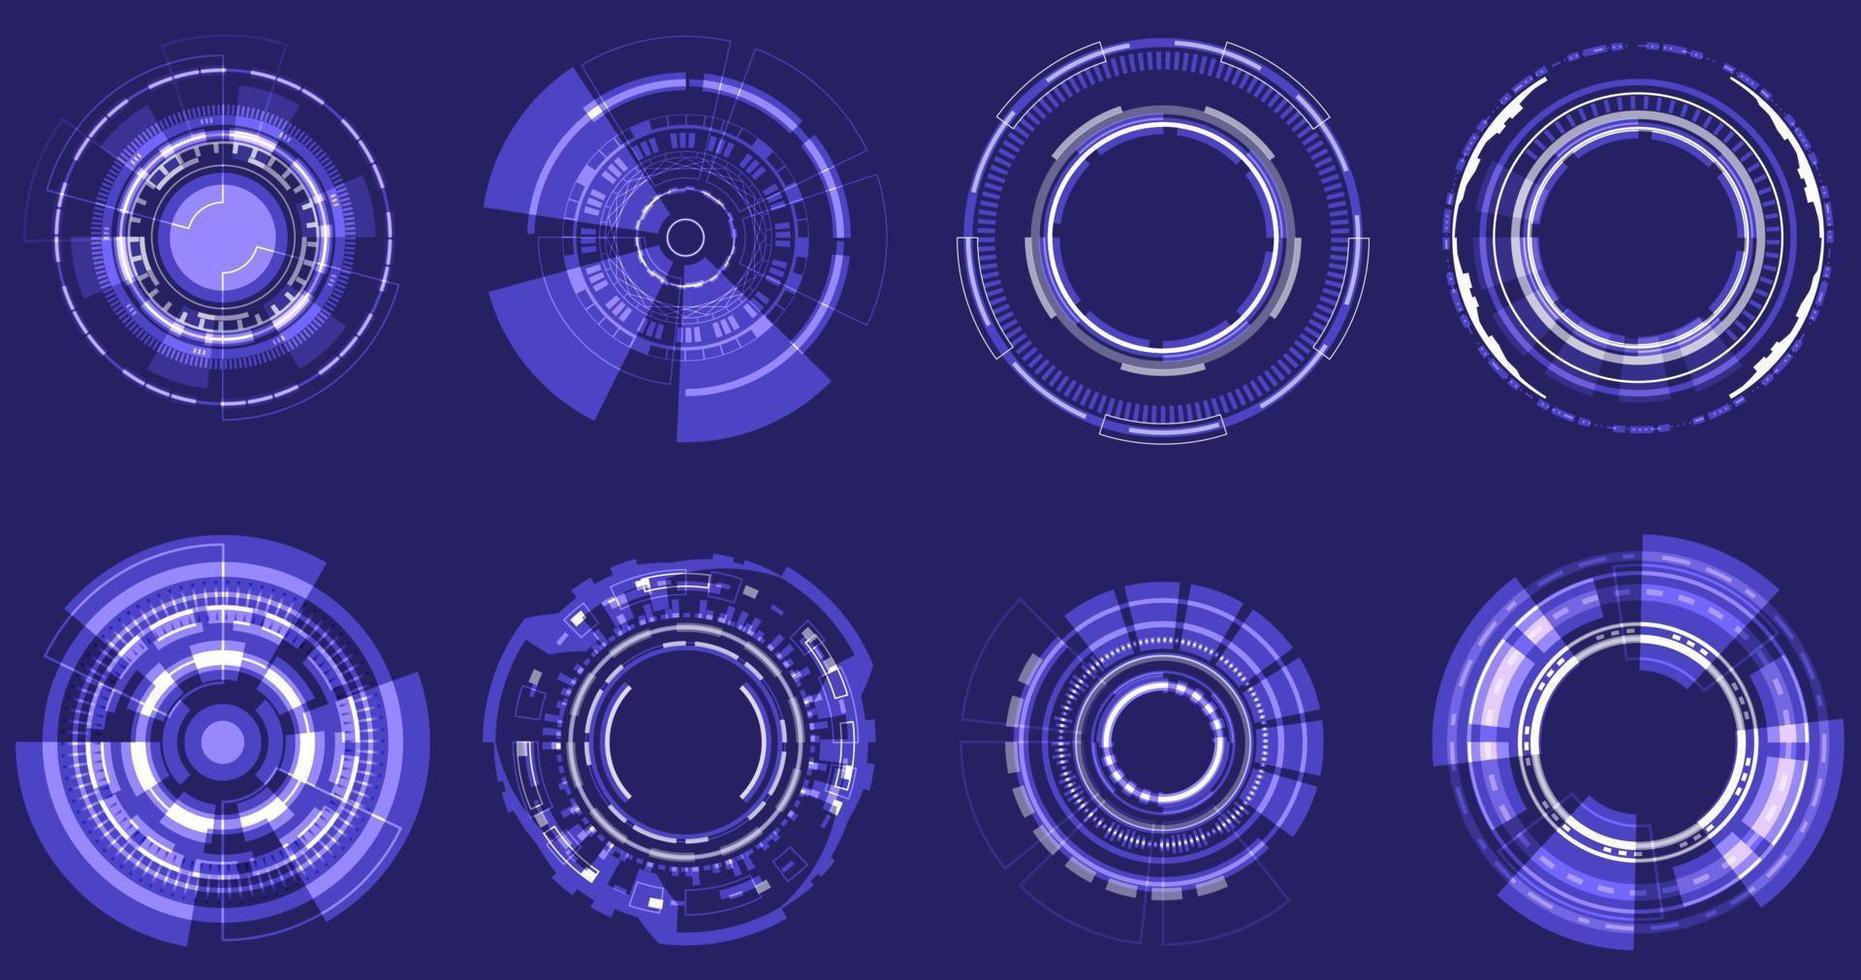 Futuristic Holographic circle of focus elements. Sci-fi round design. Military Collimator Sight. Collection HUD circuit. Camera Viewfinder set. Digital engineering vector